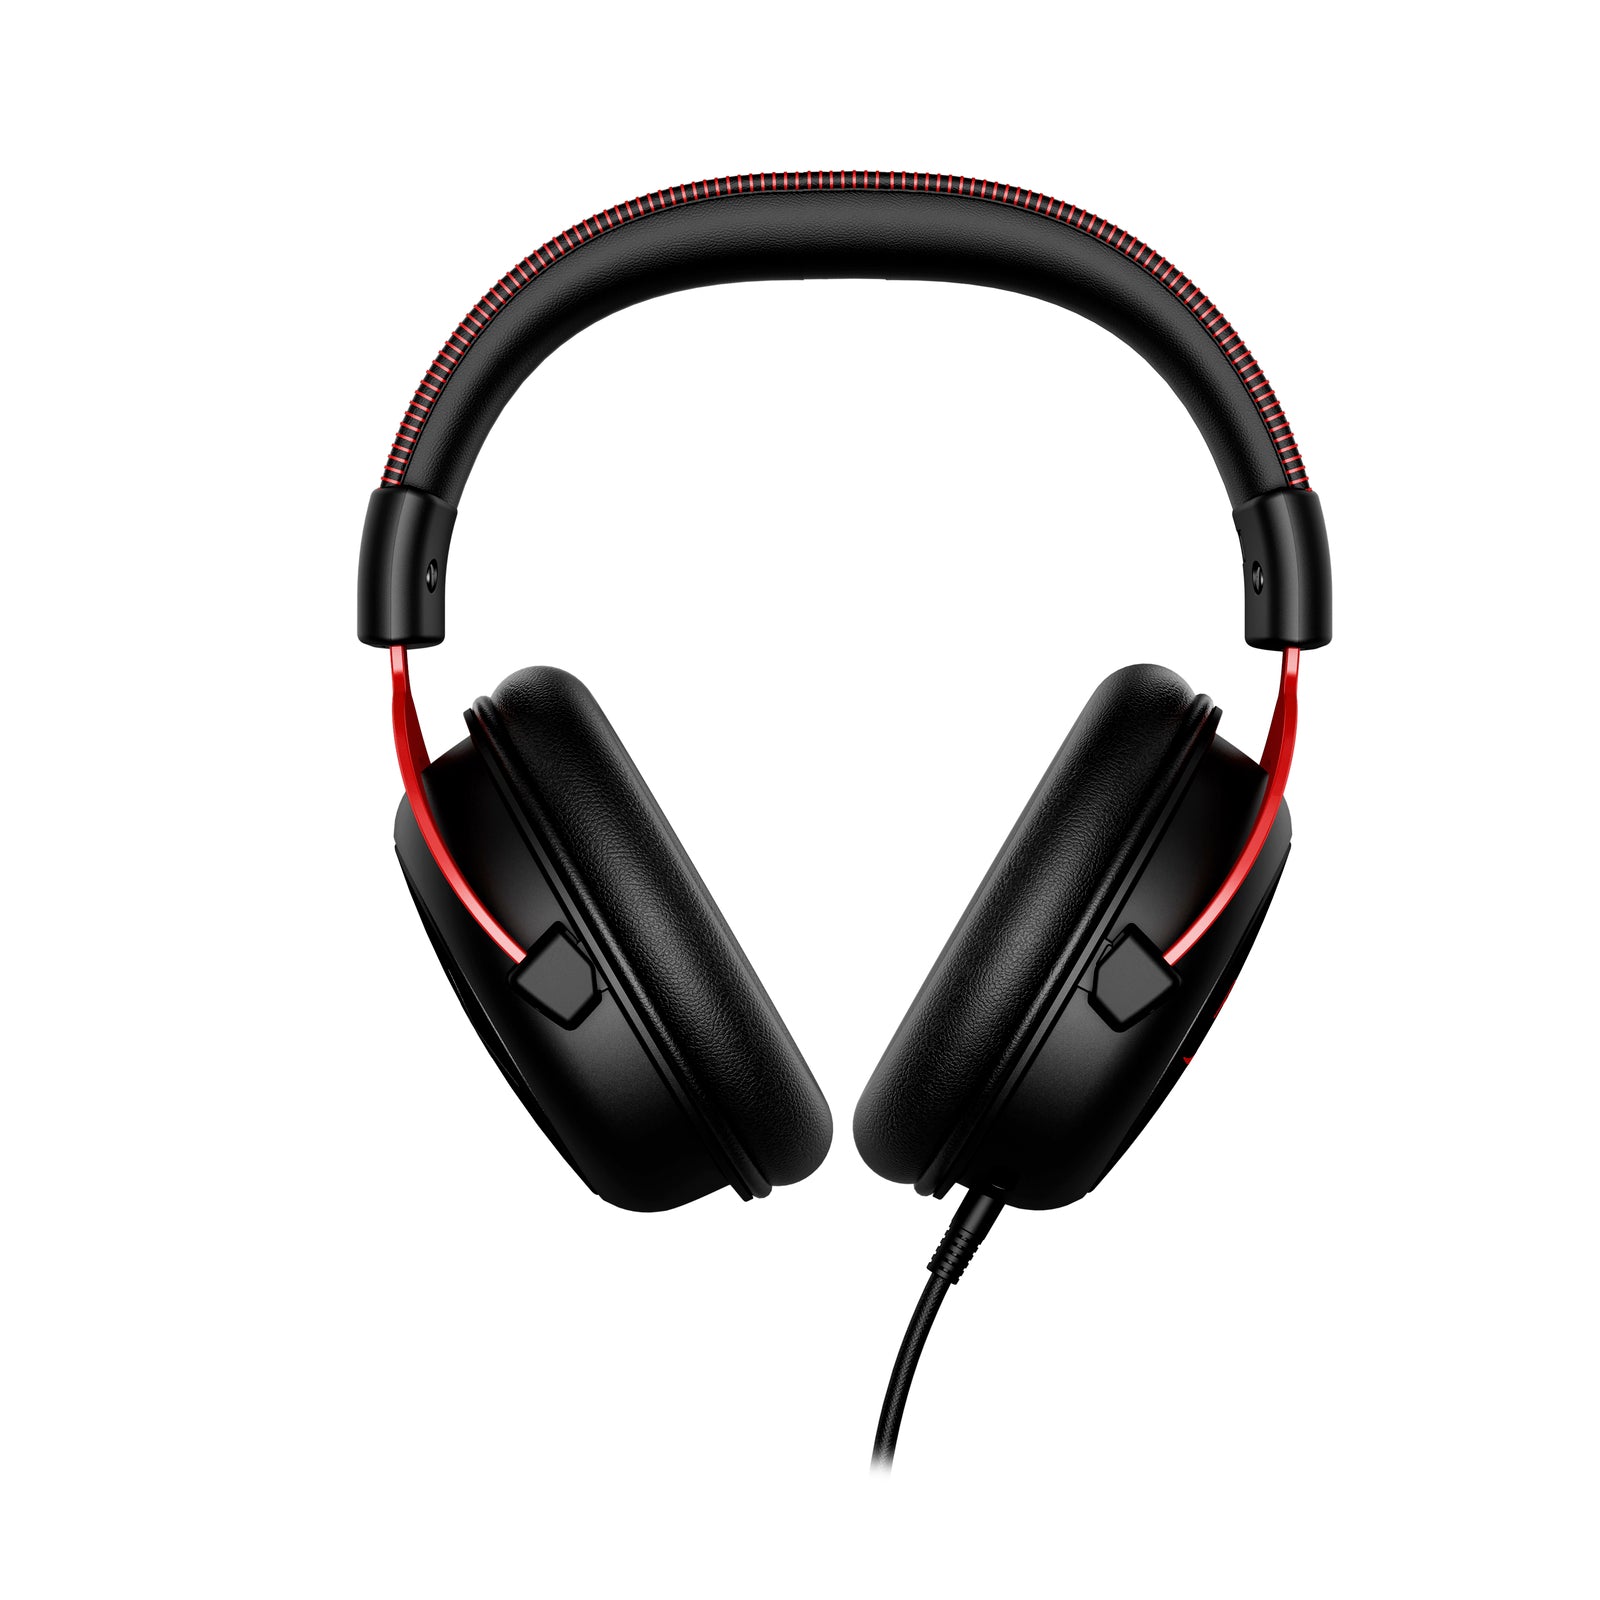 Front side view of HyperX Cloud II red gaming headset